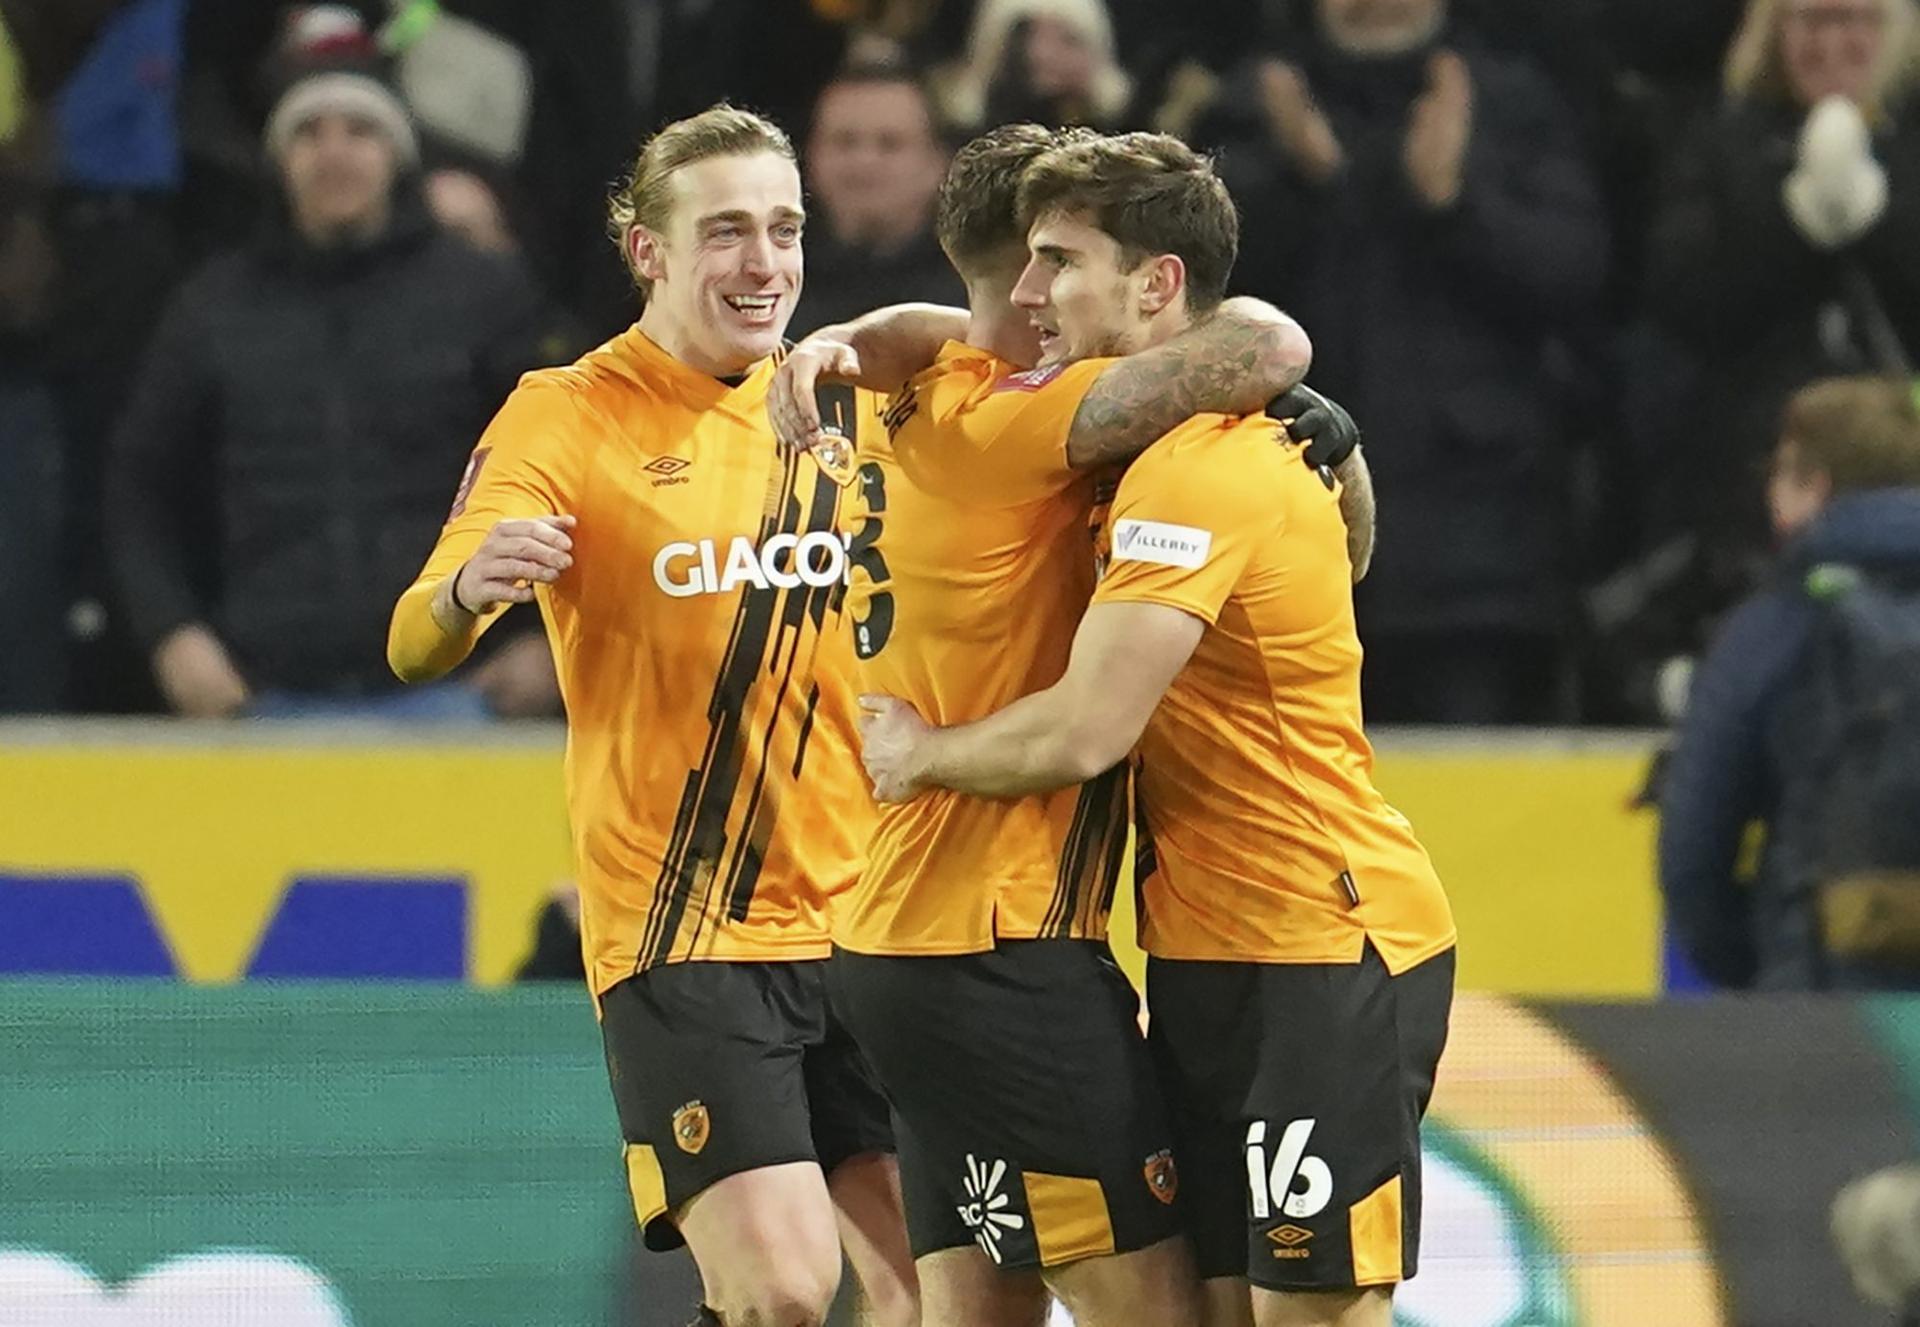 Wigan Athletic vs. Hull City Predictions, Betting Odds, and Picks - Wednesday, October 5, 2022